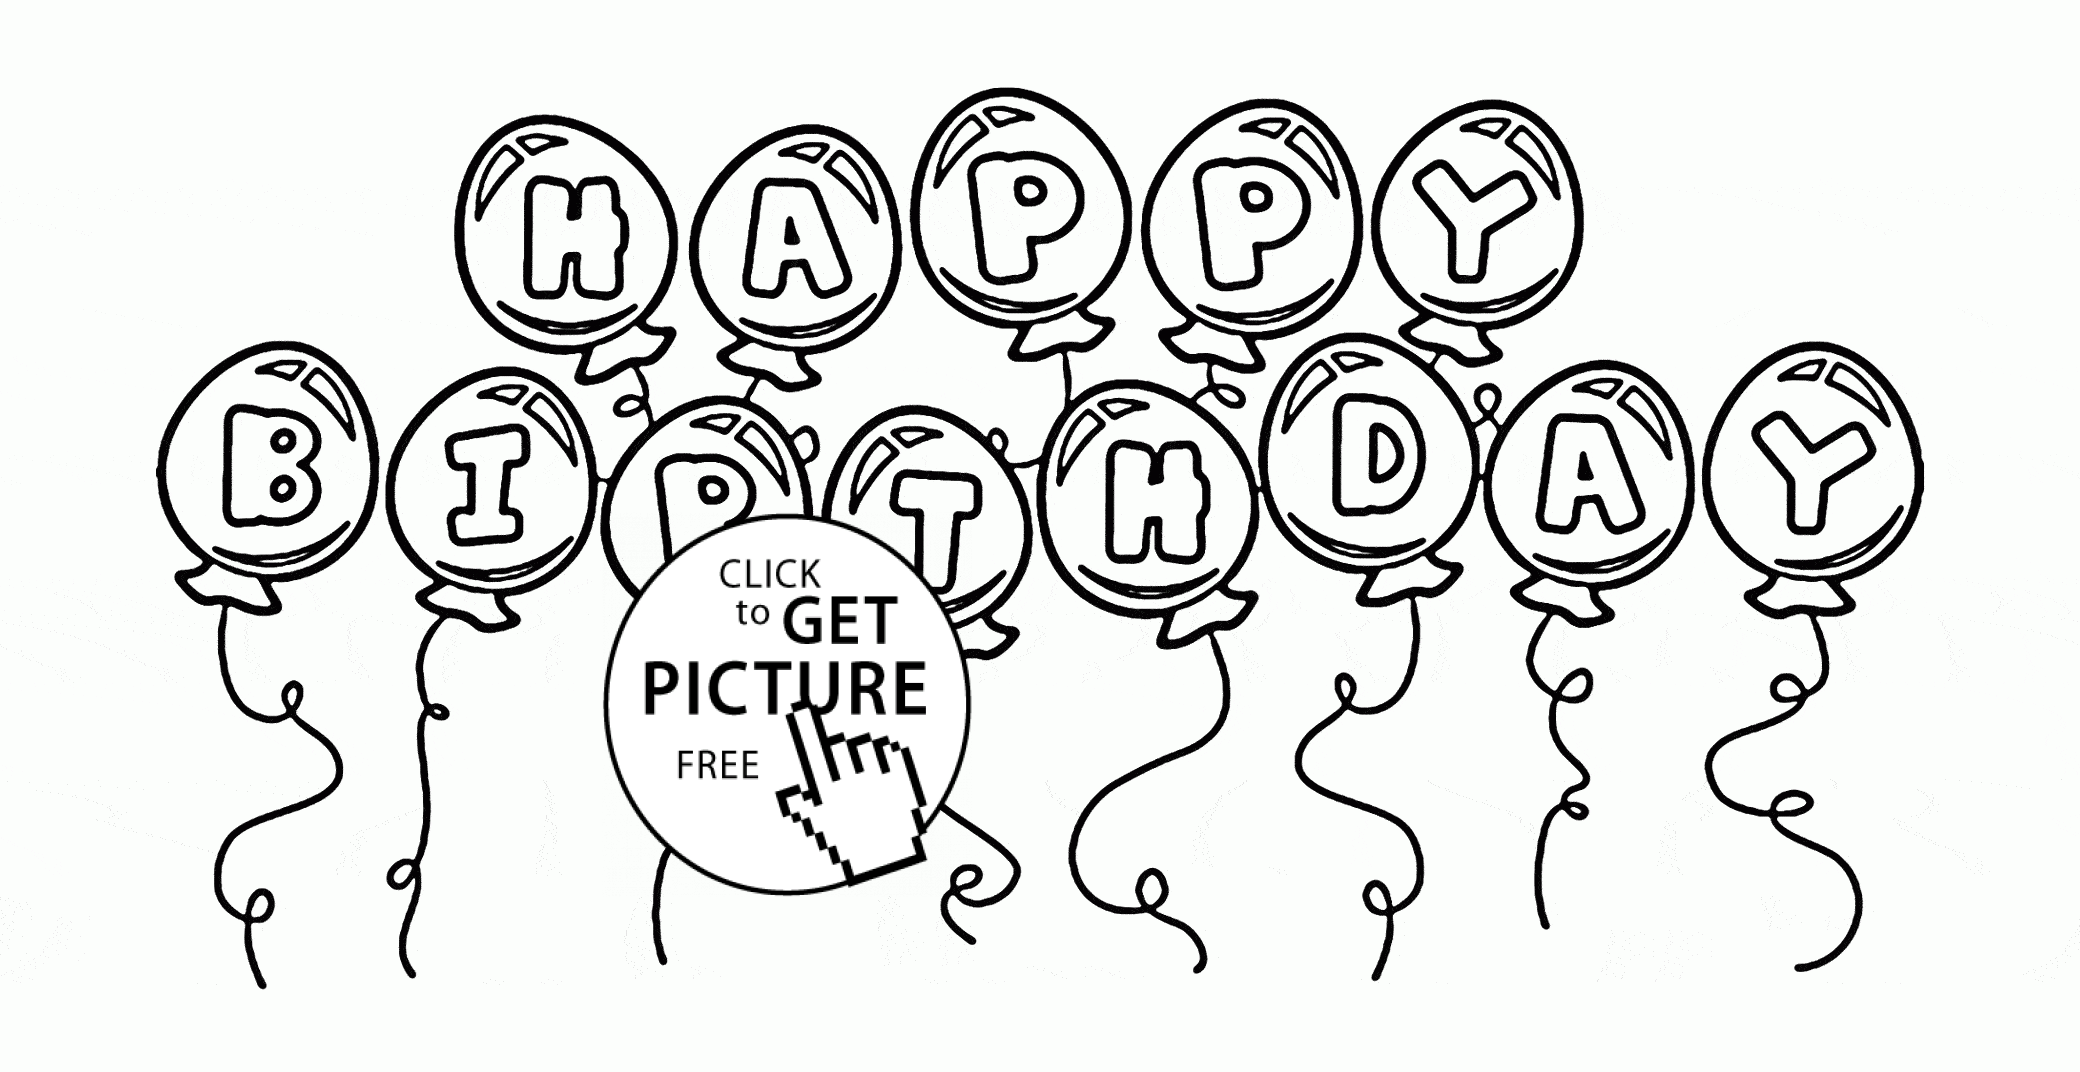 Bunch of Balloons Happy Birthday coloring page for kids, holiday ...